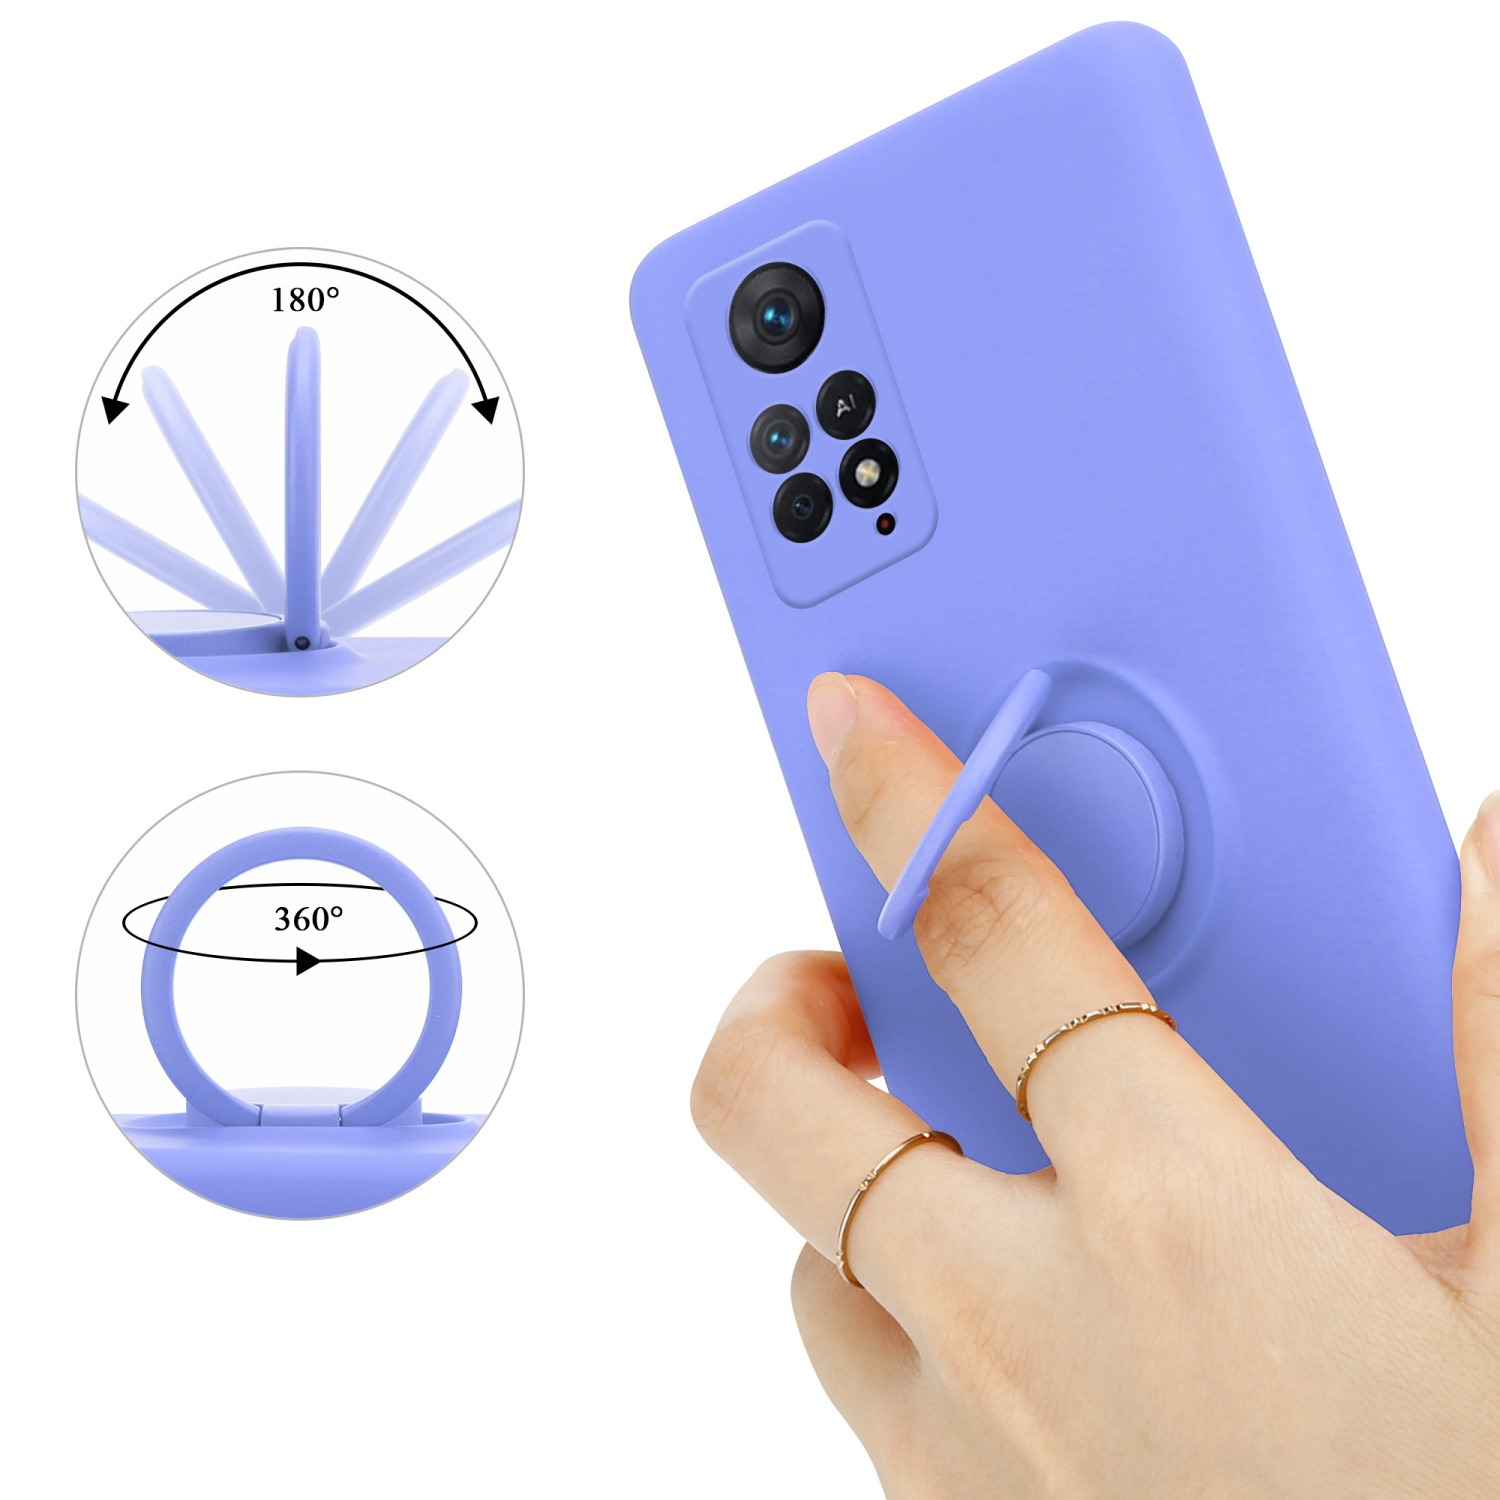 CADORABO Hülle im 5G, 11 PRO / RedMi 4G Style, Liquid HELL Silicone Backcover, LIQUID LILA Case NOTE Ring Xiaomi